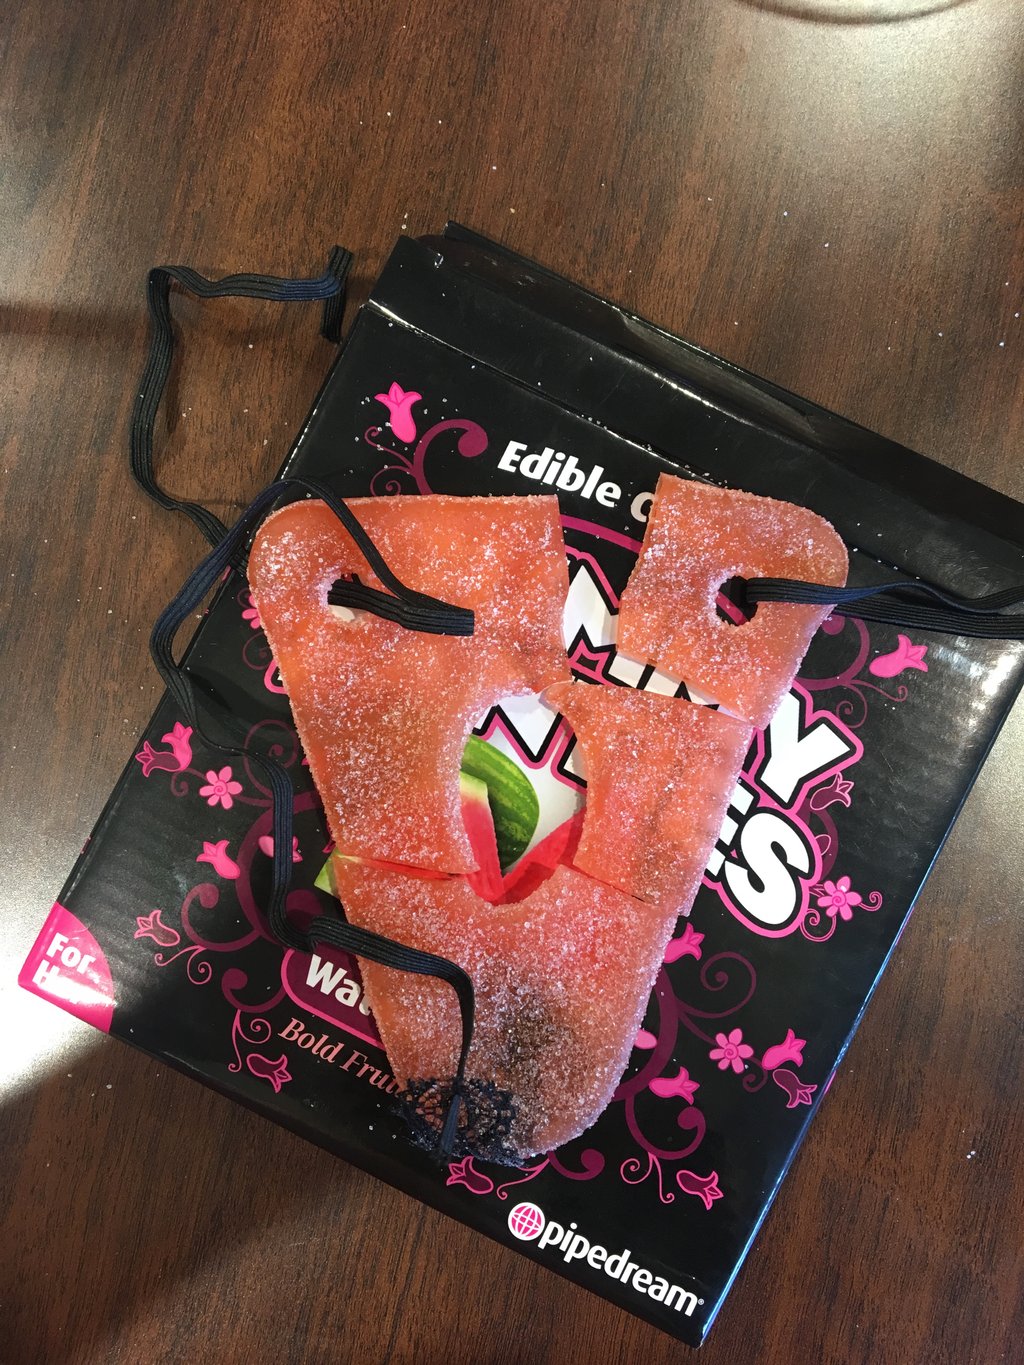 Now that's edible underwear! : r/funny